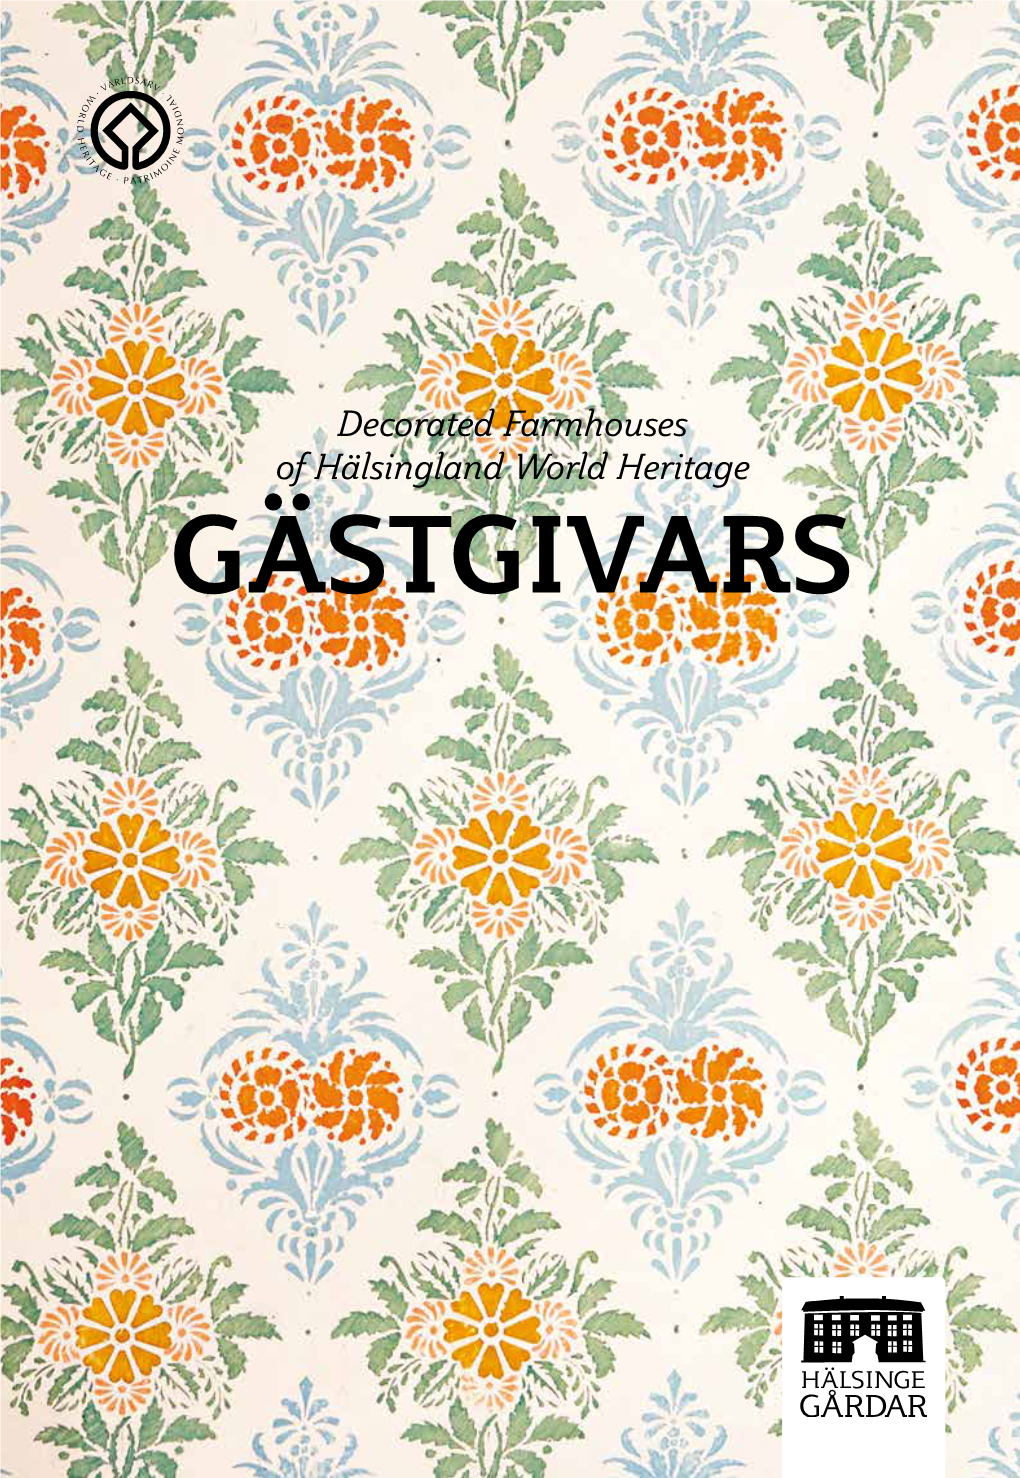 Gästgivars the Highly Proficient Painter Imitated Wedgwood's Fine English Porcelain, and Used Stencilling in a Way That Spread to Other Parts of Sweden